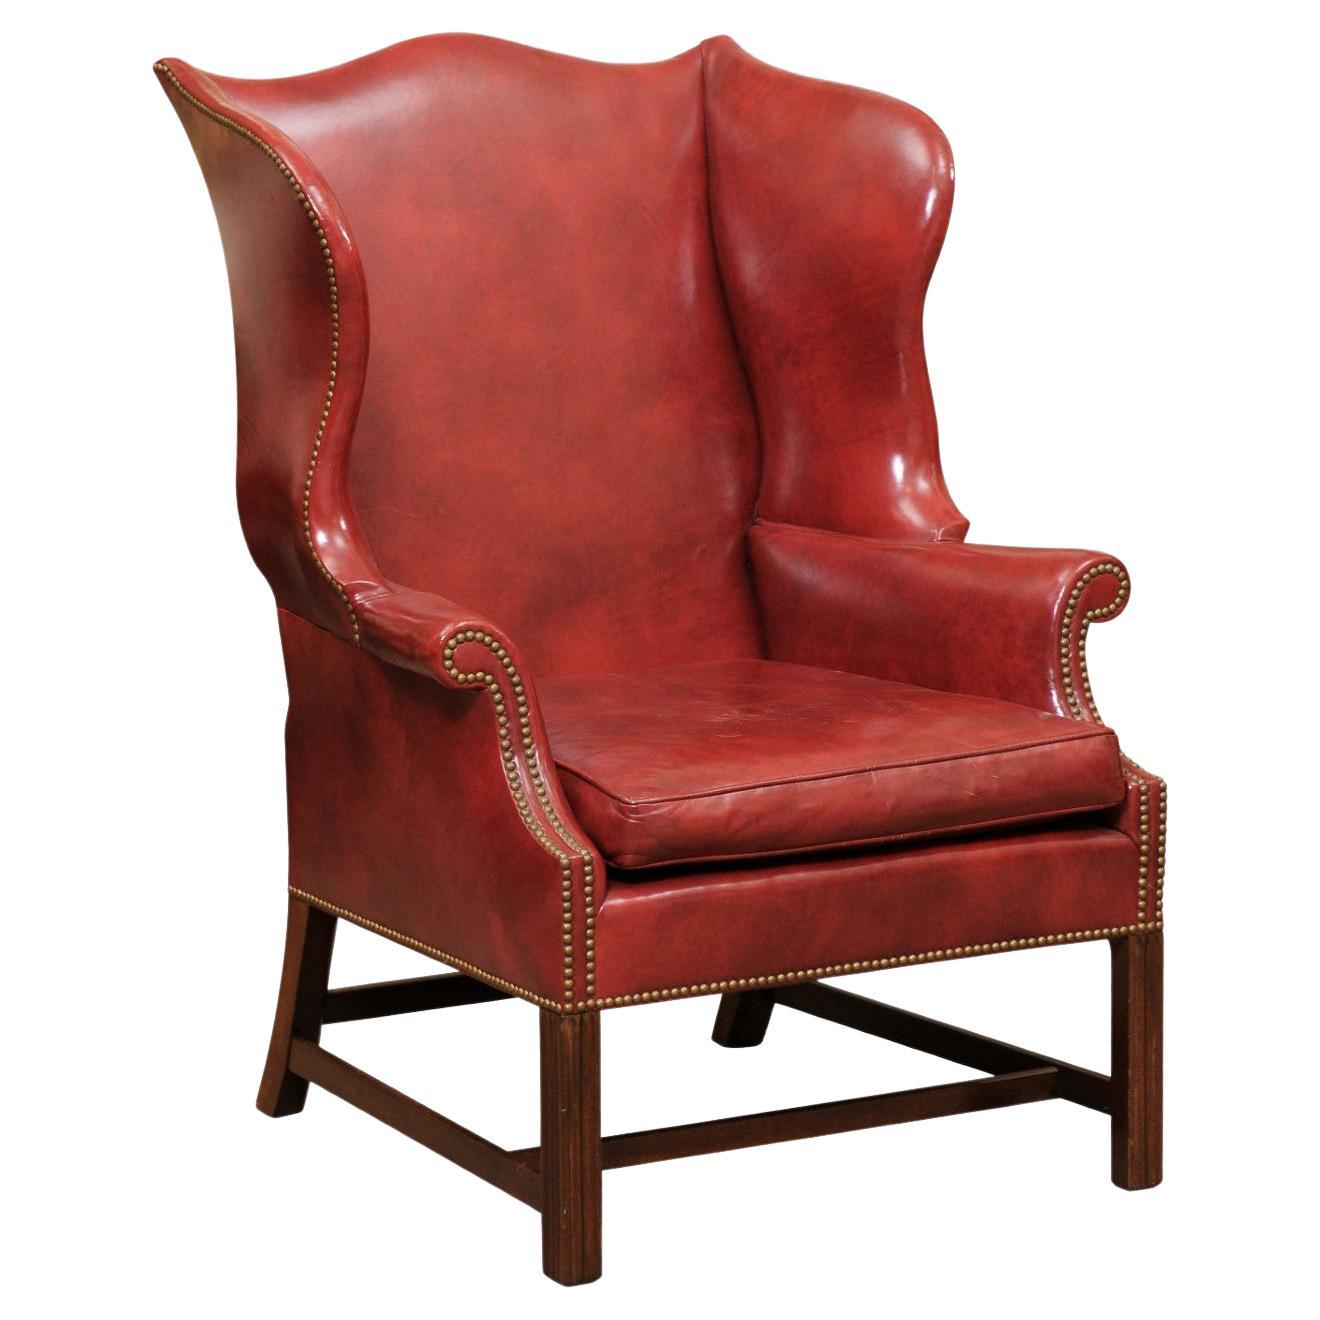 20th Century English Wing Chair in Mahogany & Red Leather Upholstery with Brass  For Sale